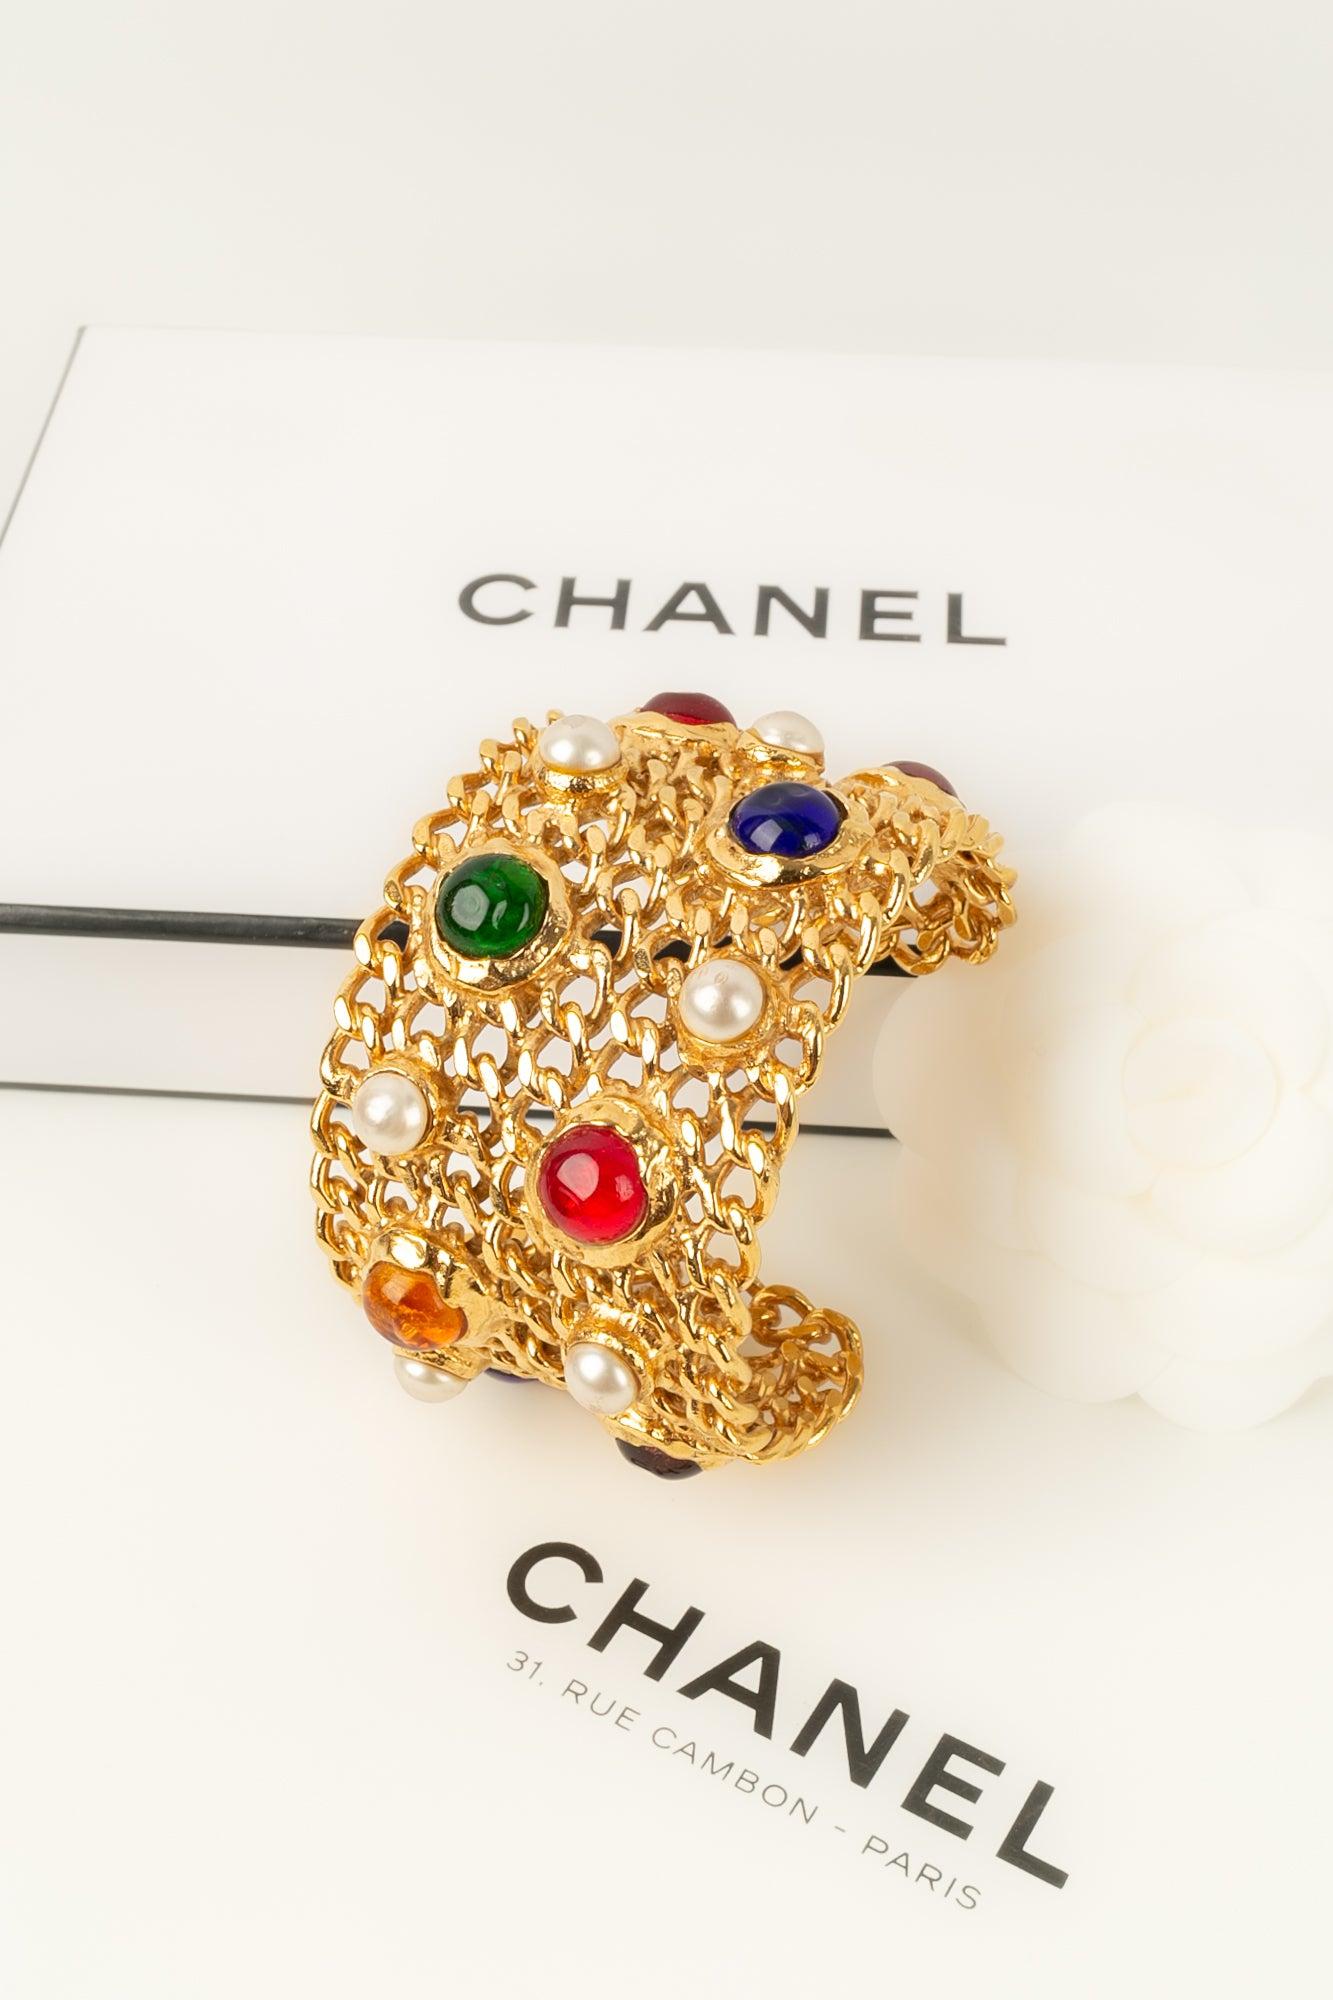 Chanel Cuff Bracelet in Golden Metal with Cabochons For Sale 6